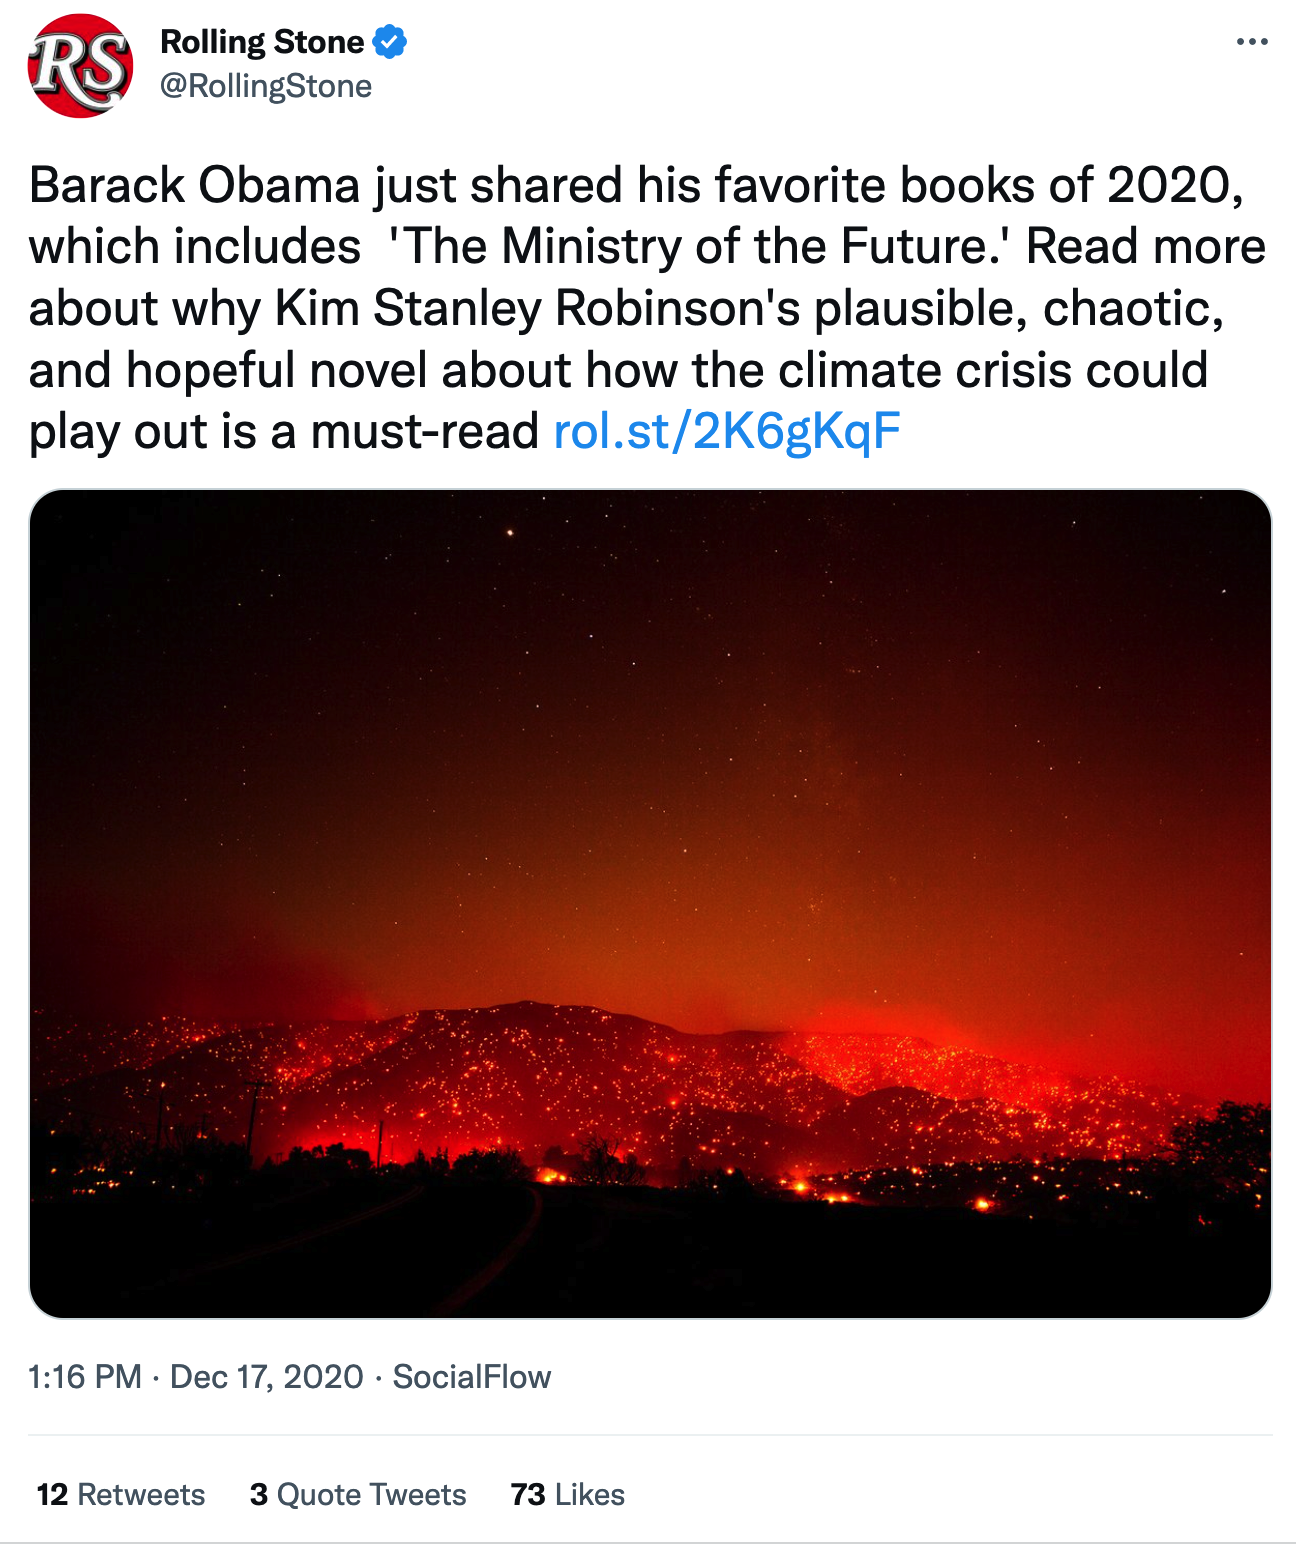 'Ministry' was one of Obama's favorite books of 2020.